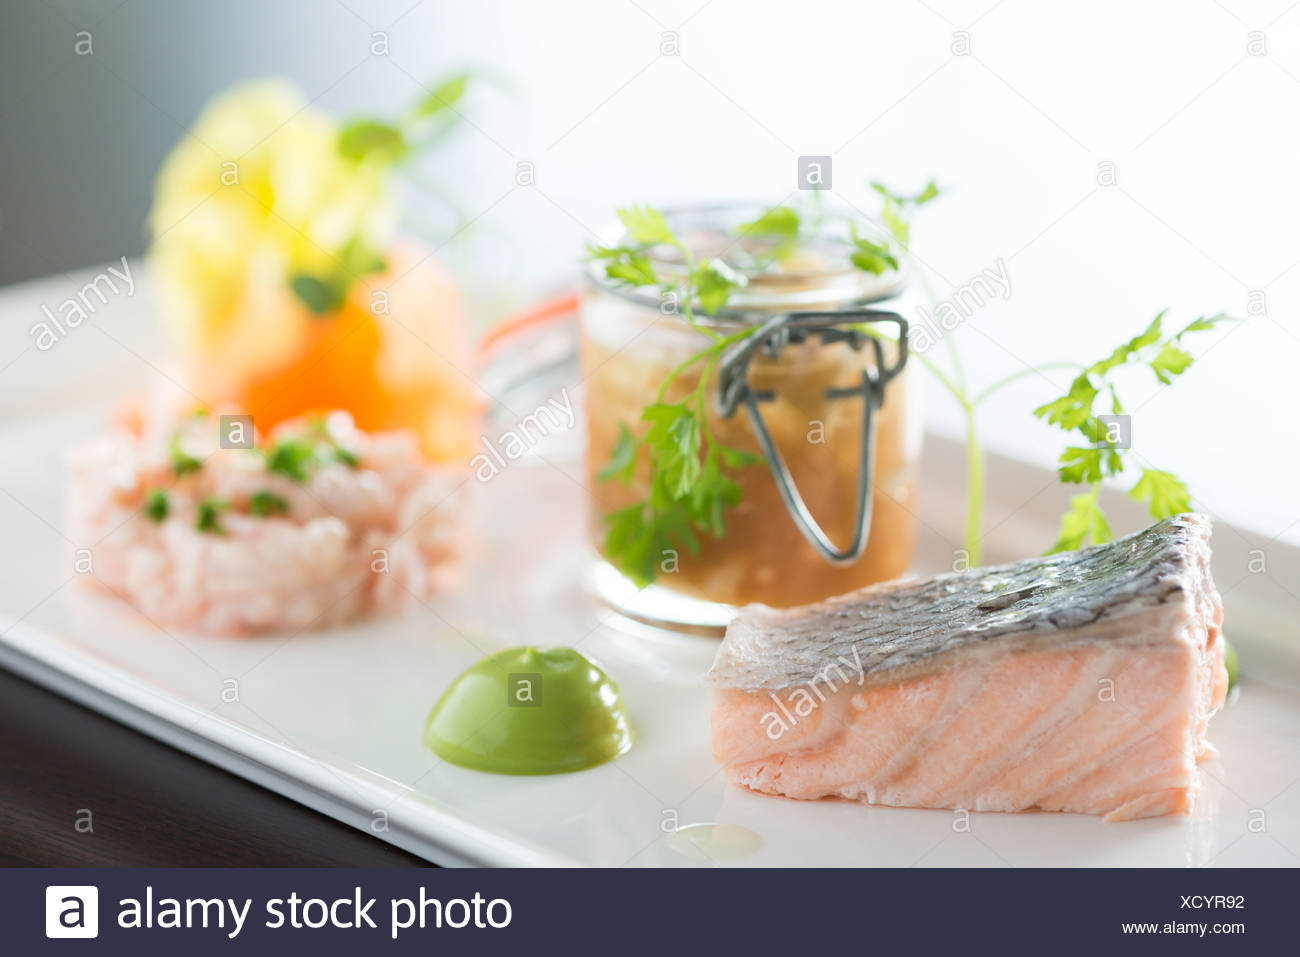 Seafood fish from a fine dining restaurant Stock Photo - Alamy